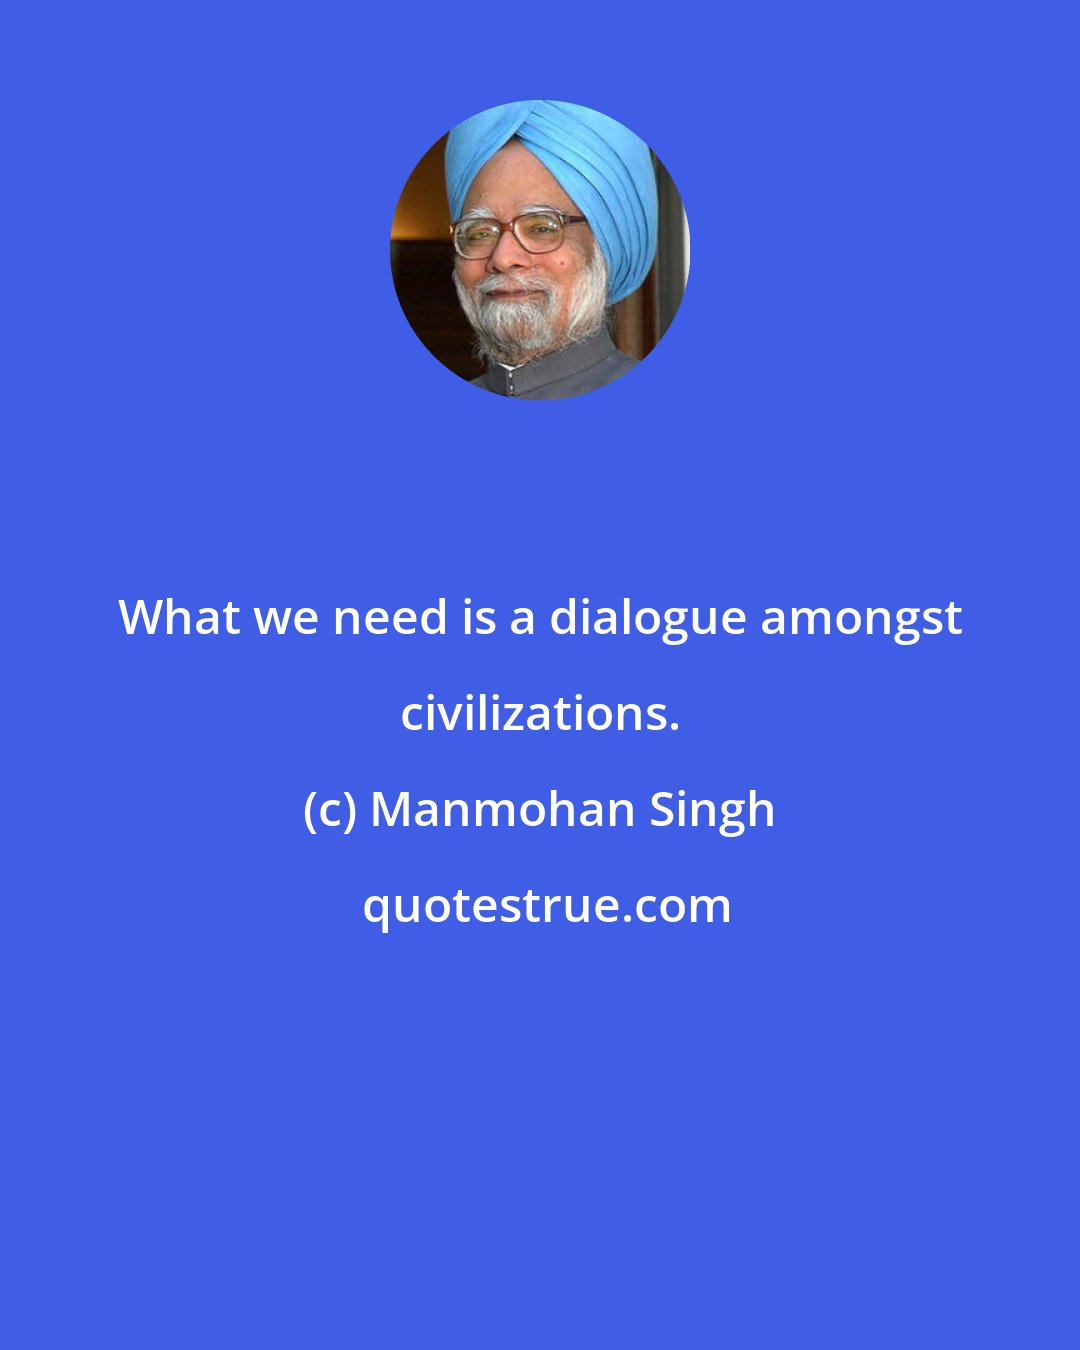 Manmohan Singh: What we need is a dialogue amongst civilizations.